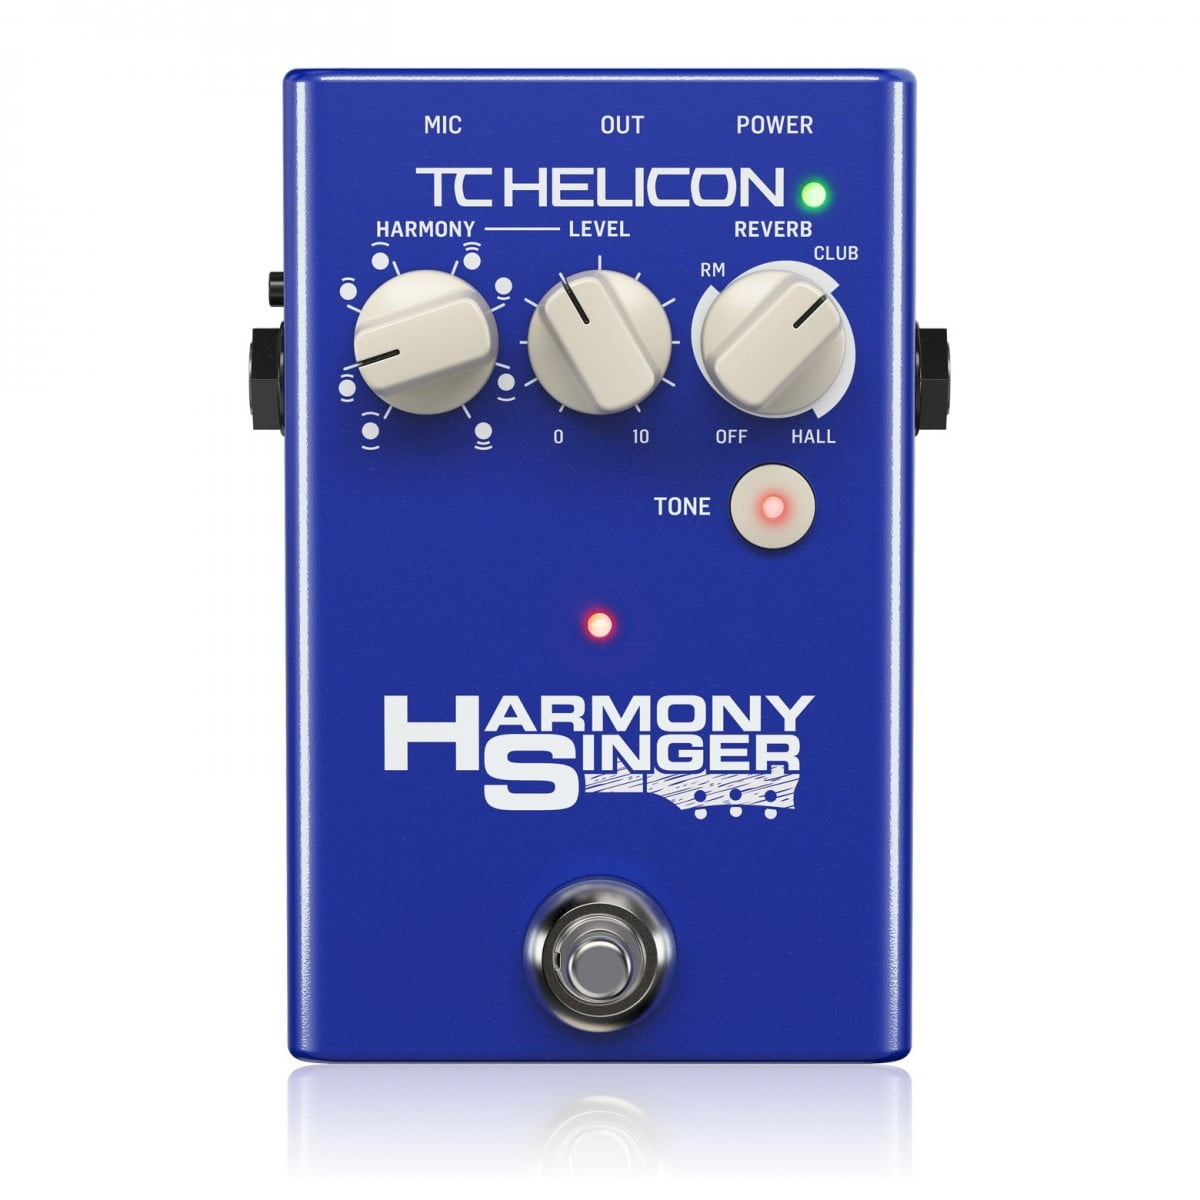 TC Helicon Harmony Singer 2 Vocal Processor - New TC Helicon           Reverb   EQ     Guitar Effect Pedal